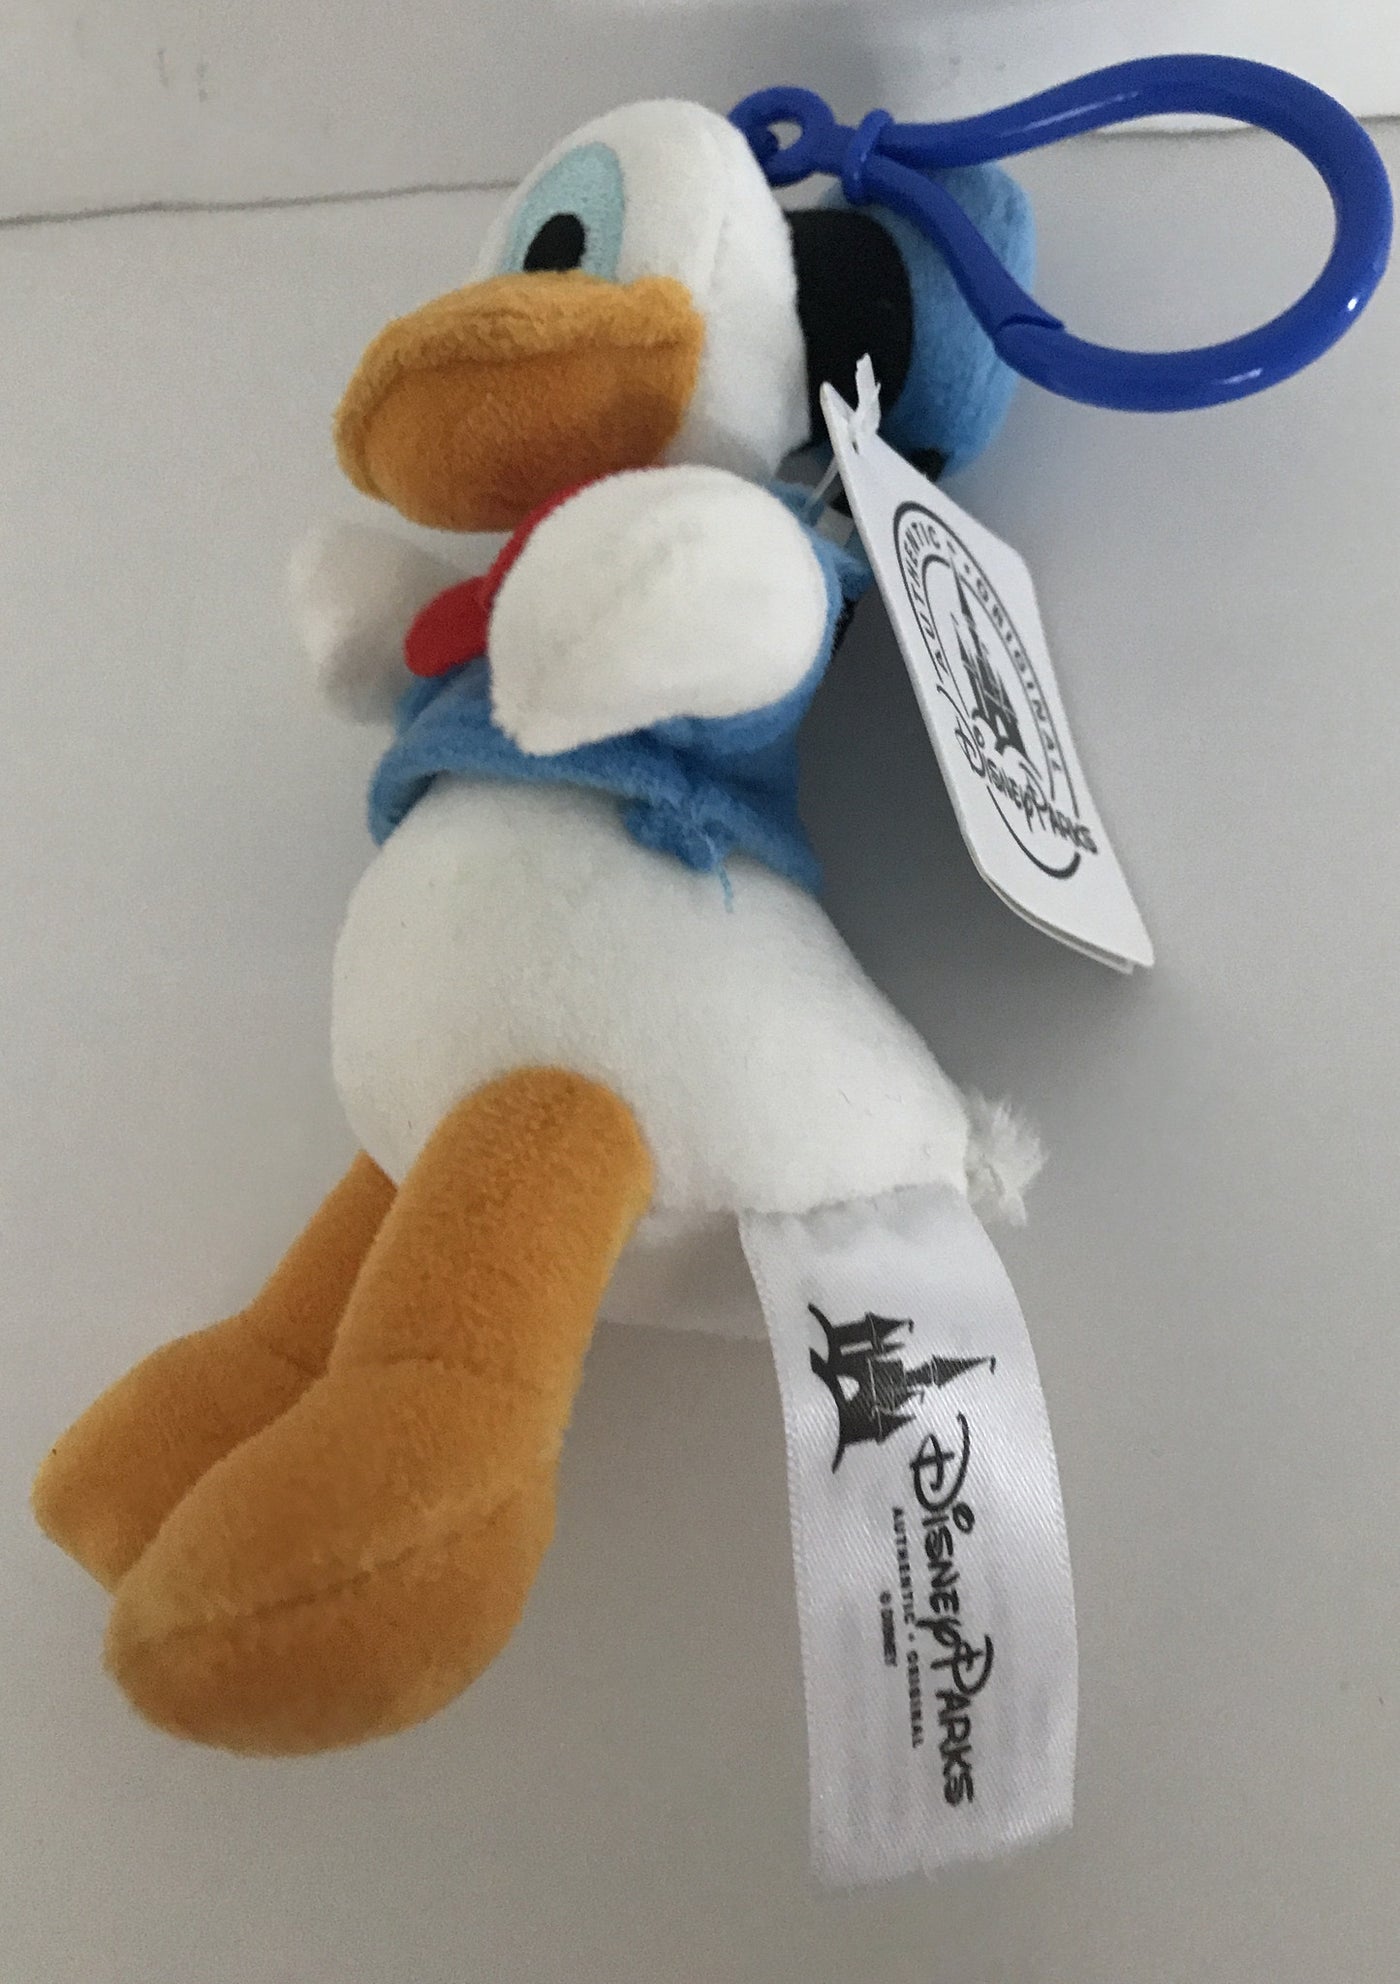 Disney Parks 6" Donald Keychain Plush New With Tags